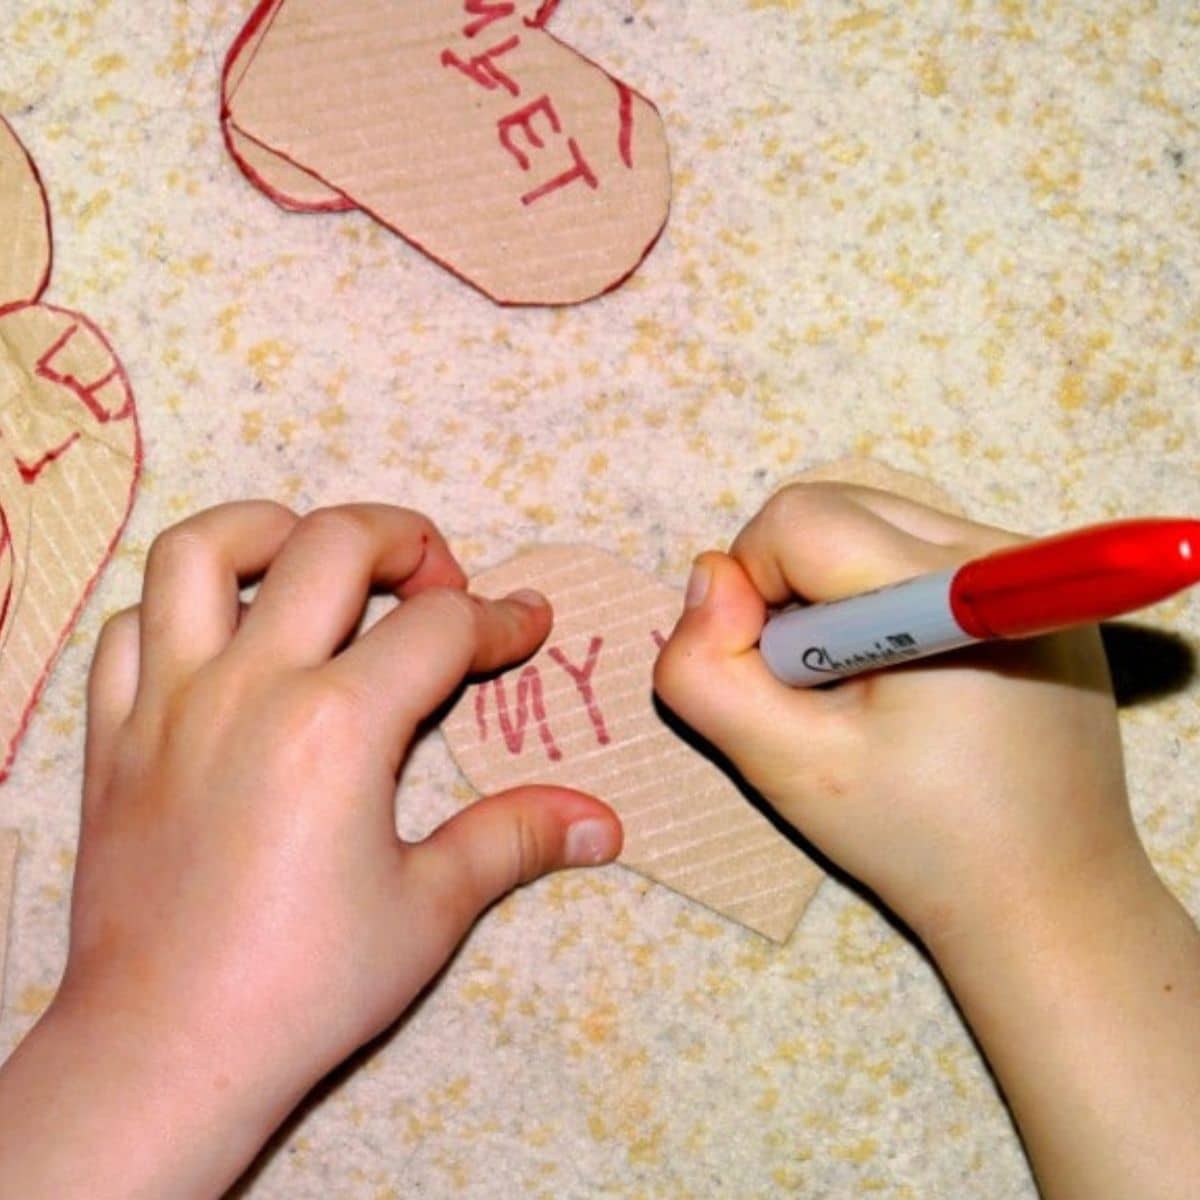 Kid hands with a red marker writing on carboard hearts.